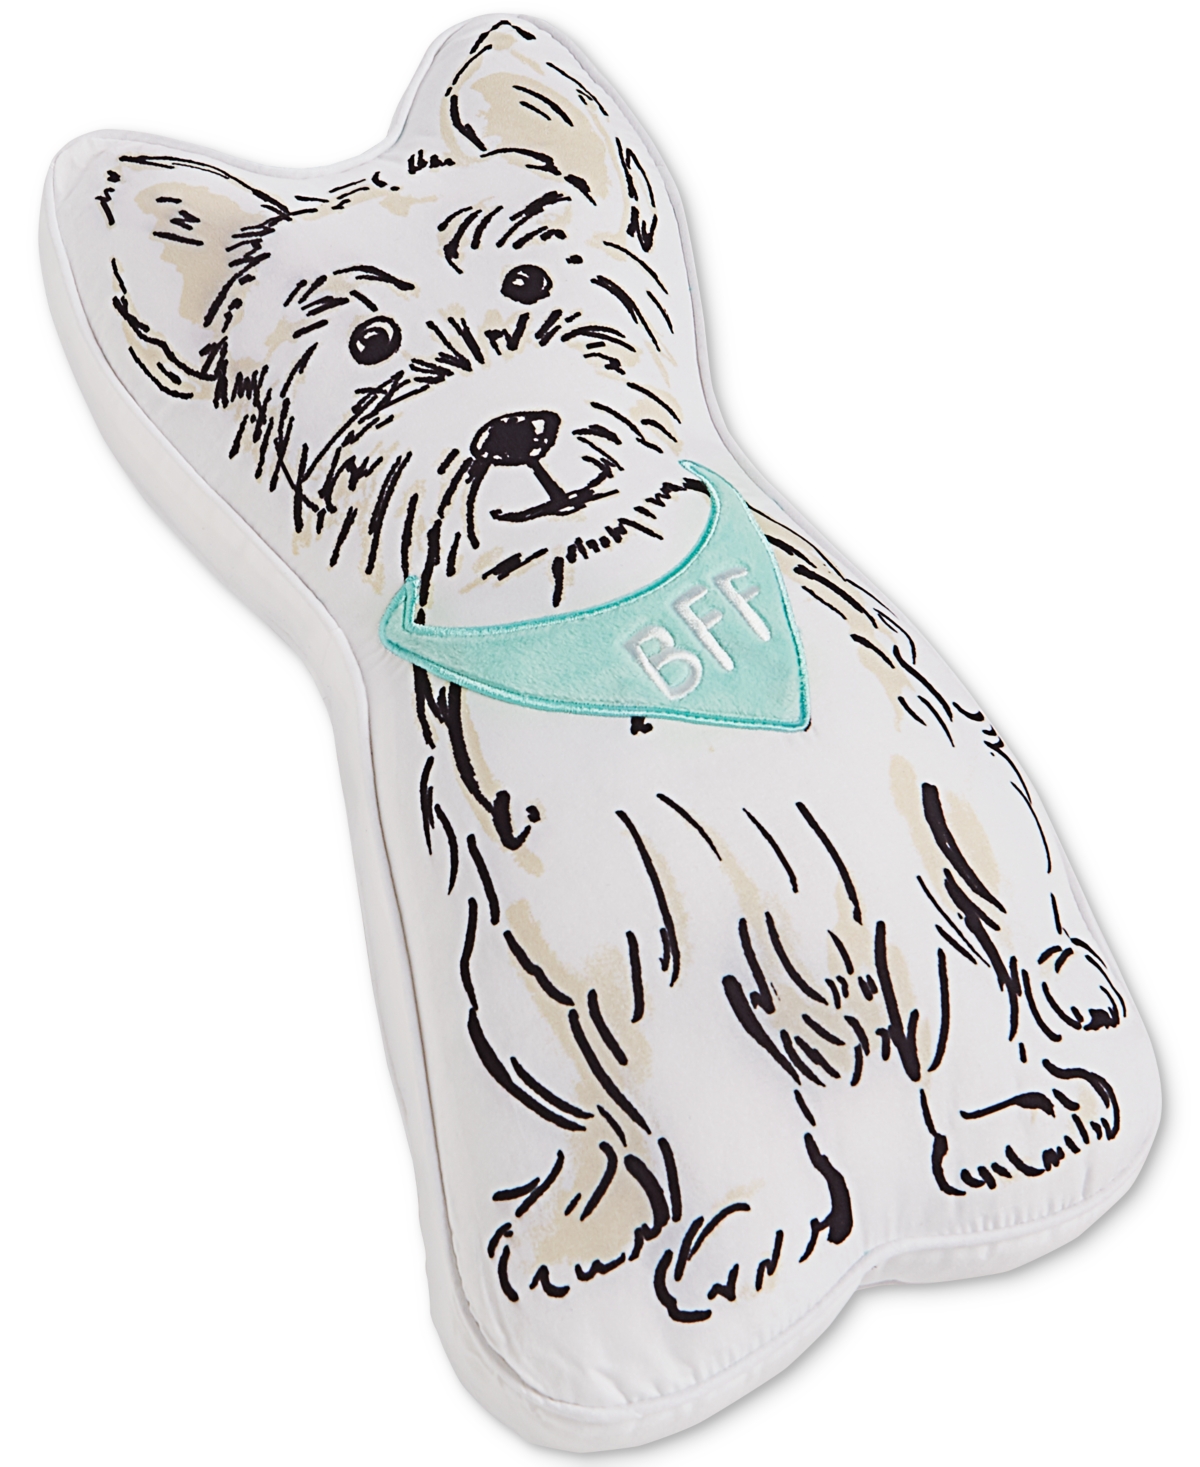 Charter Club Kids Figural Dog Decorative Pillow, 9" x 17", Created for Macy's Bedding